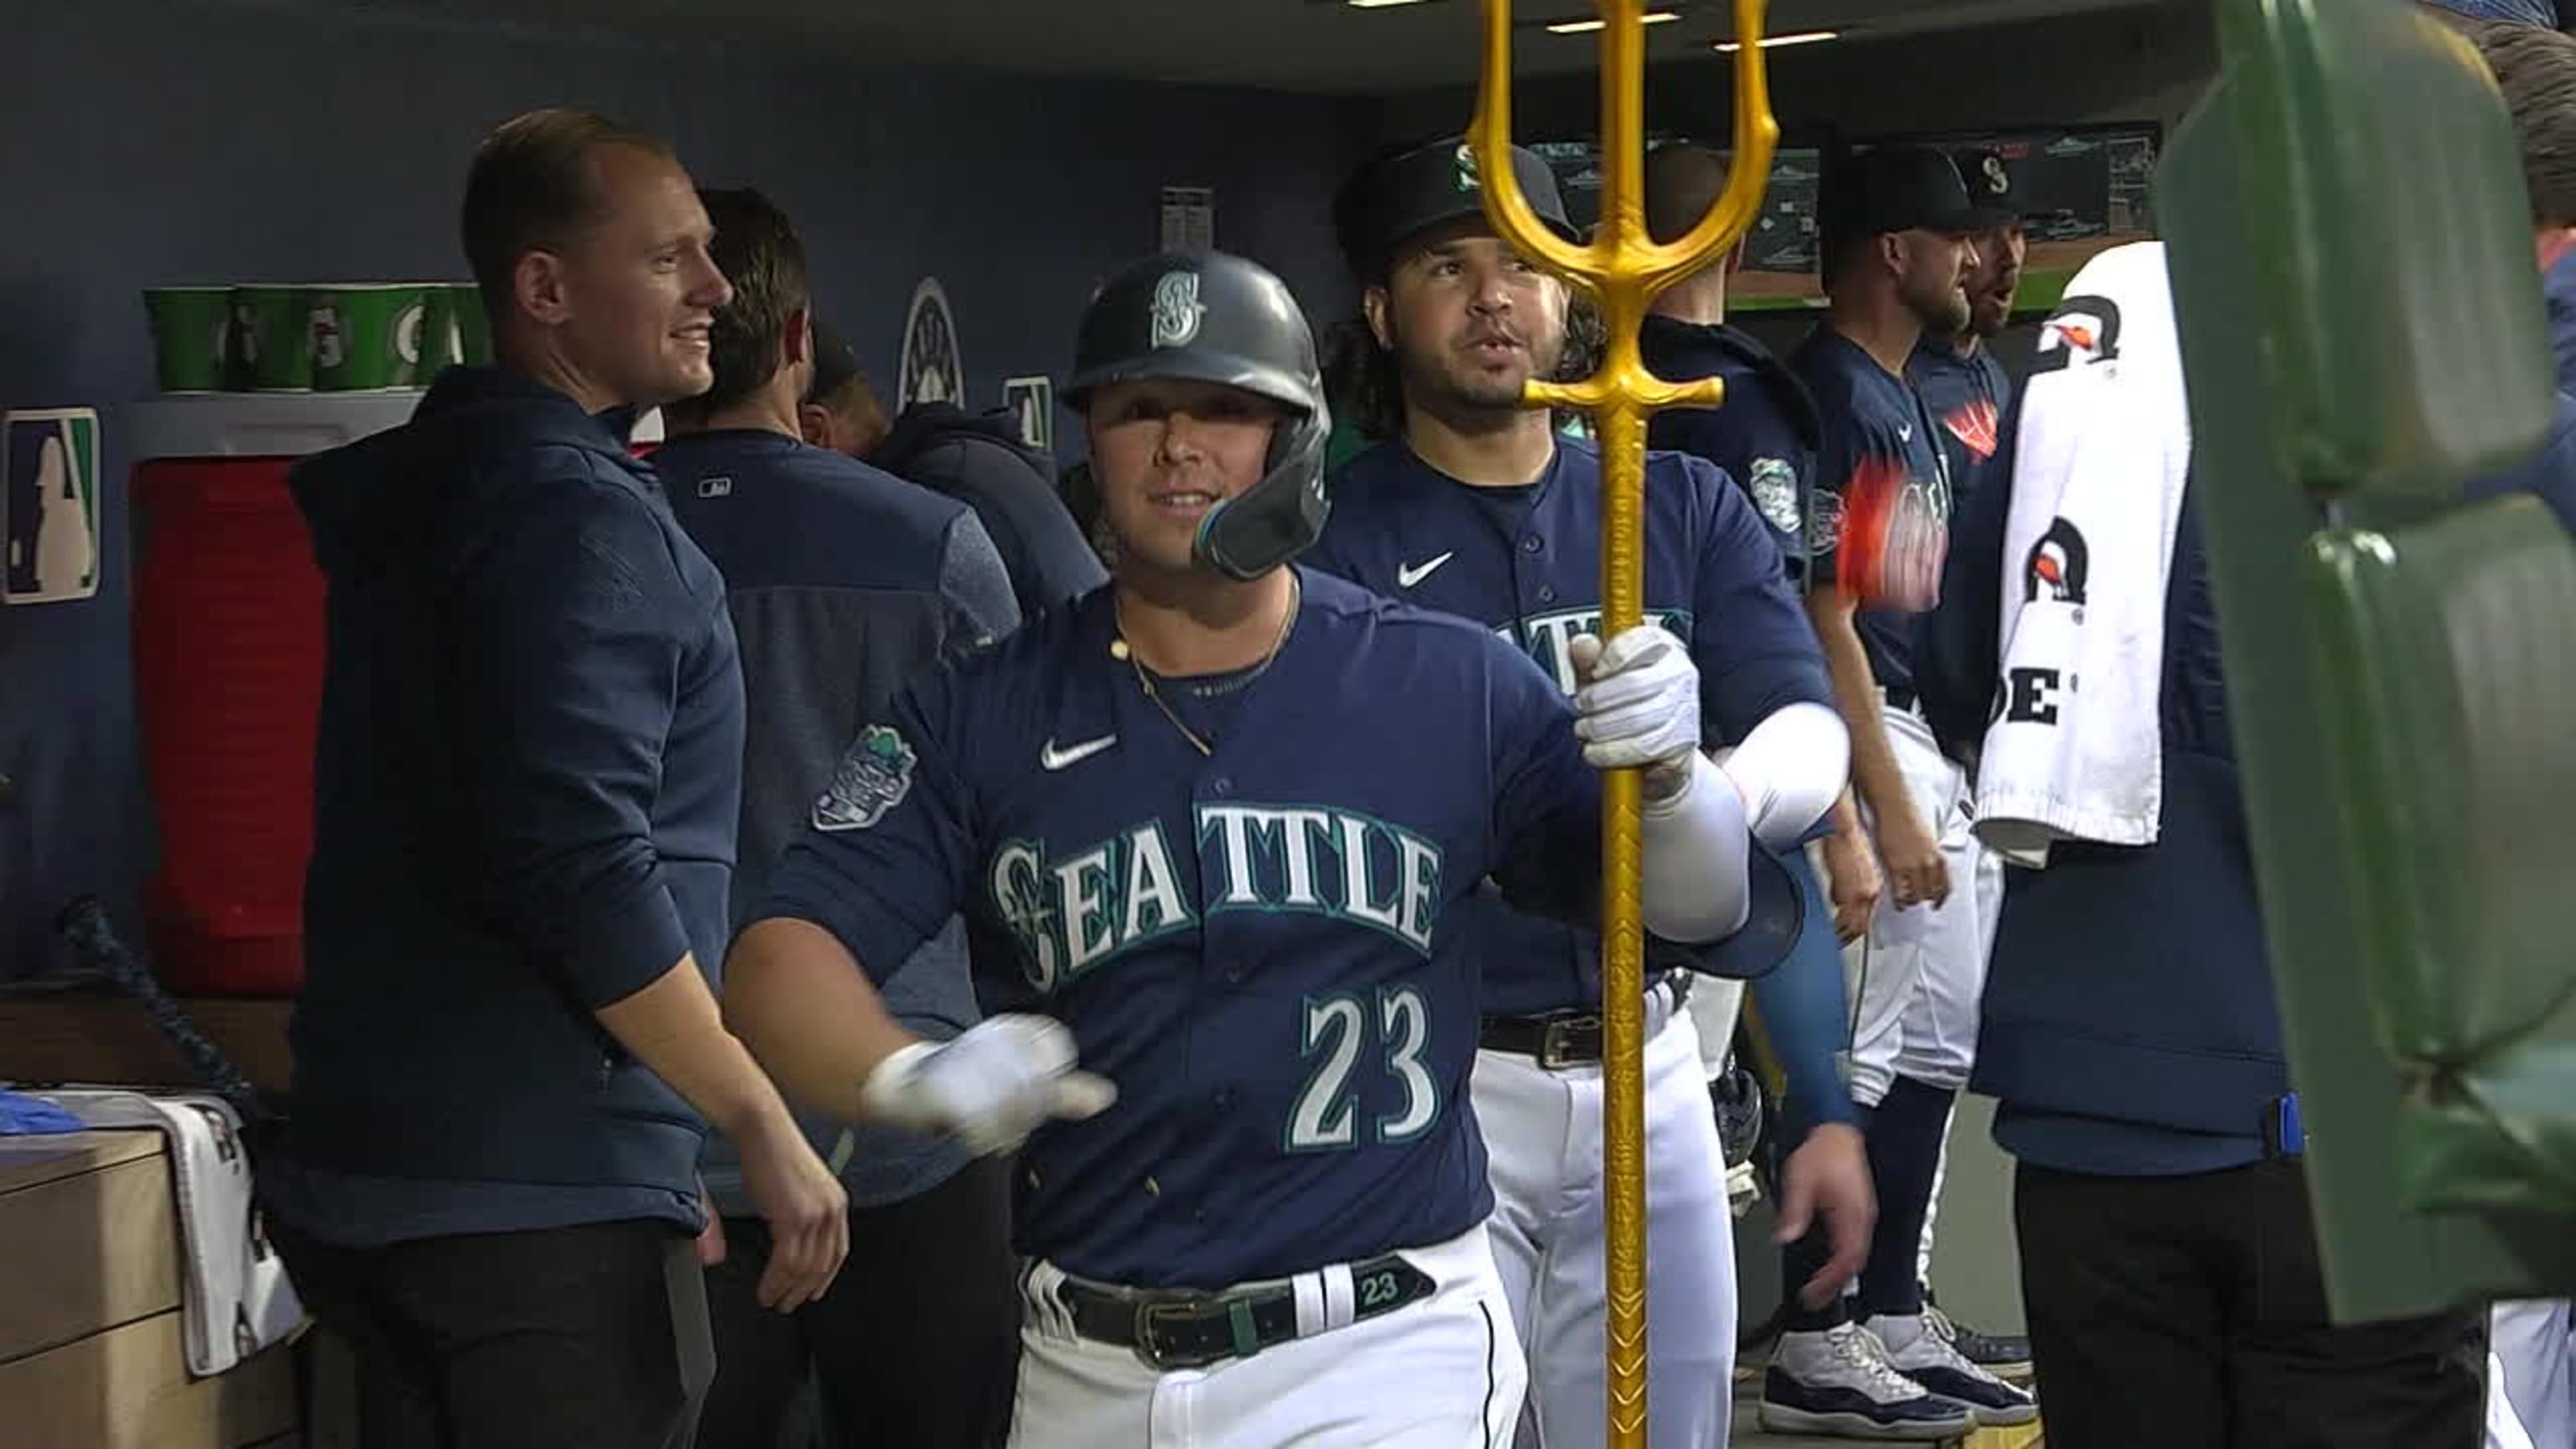 Ty France's journey from 34th-round pick to the Seattle Mariners